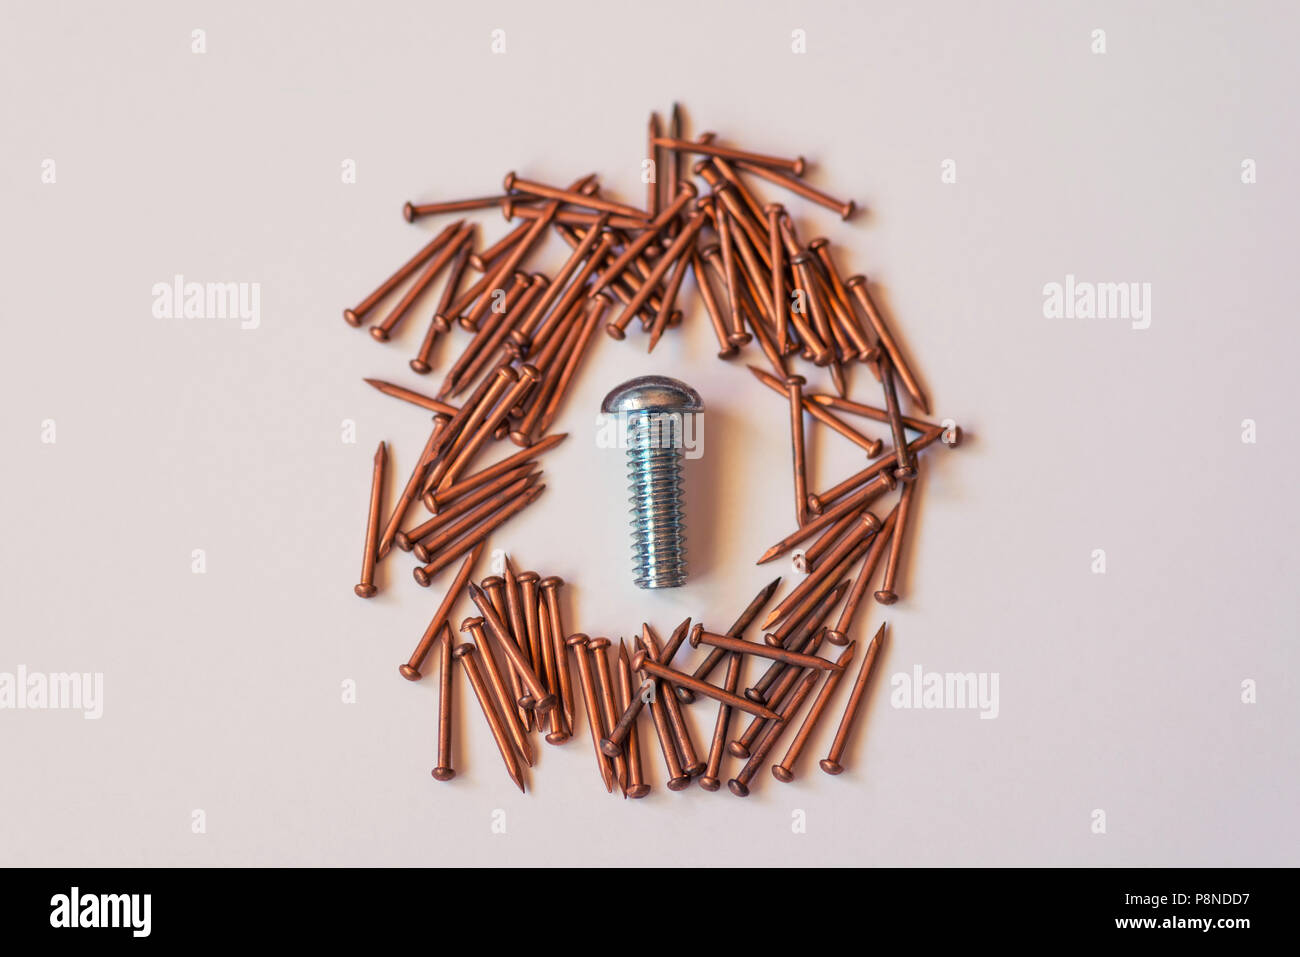 Close up of a group of bronze nails and a single metal screw. Stock Photo